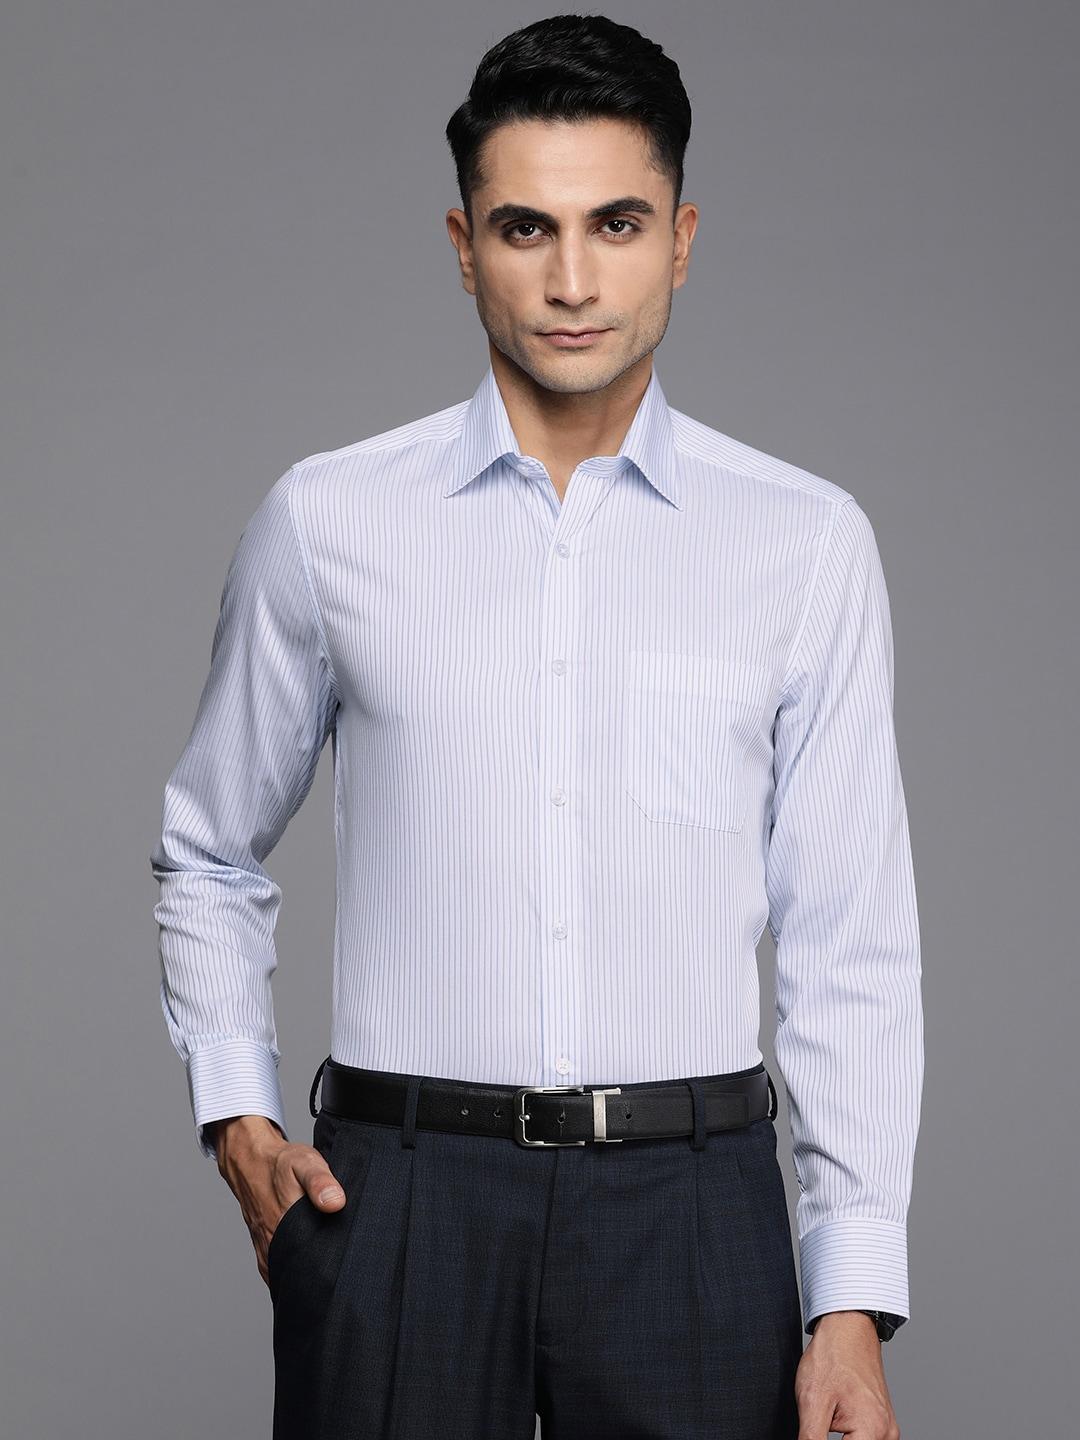 louis-philippe-pure-cotton-classic-fit-striped-formal-shirt